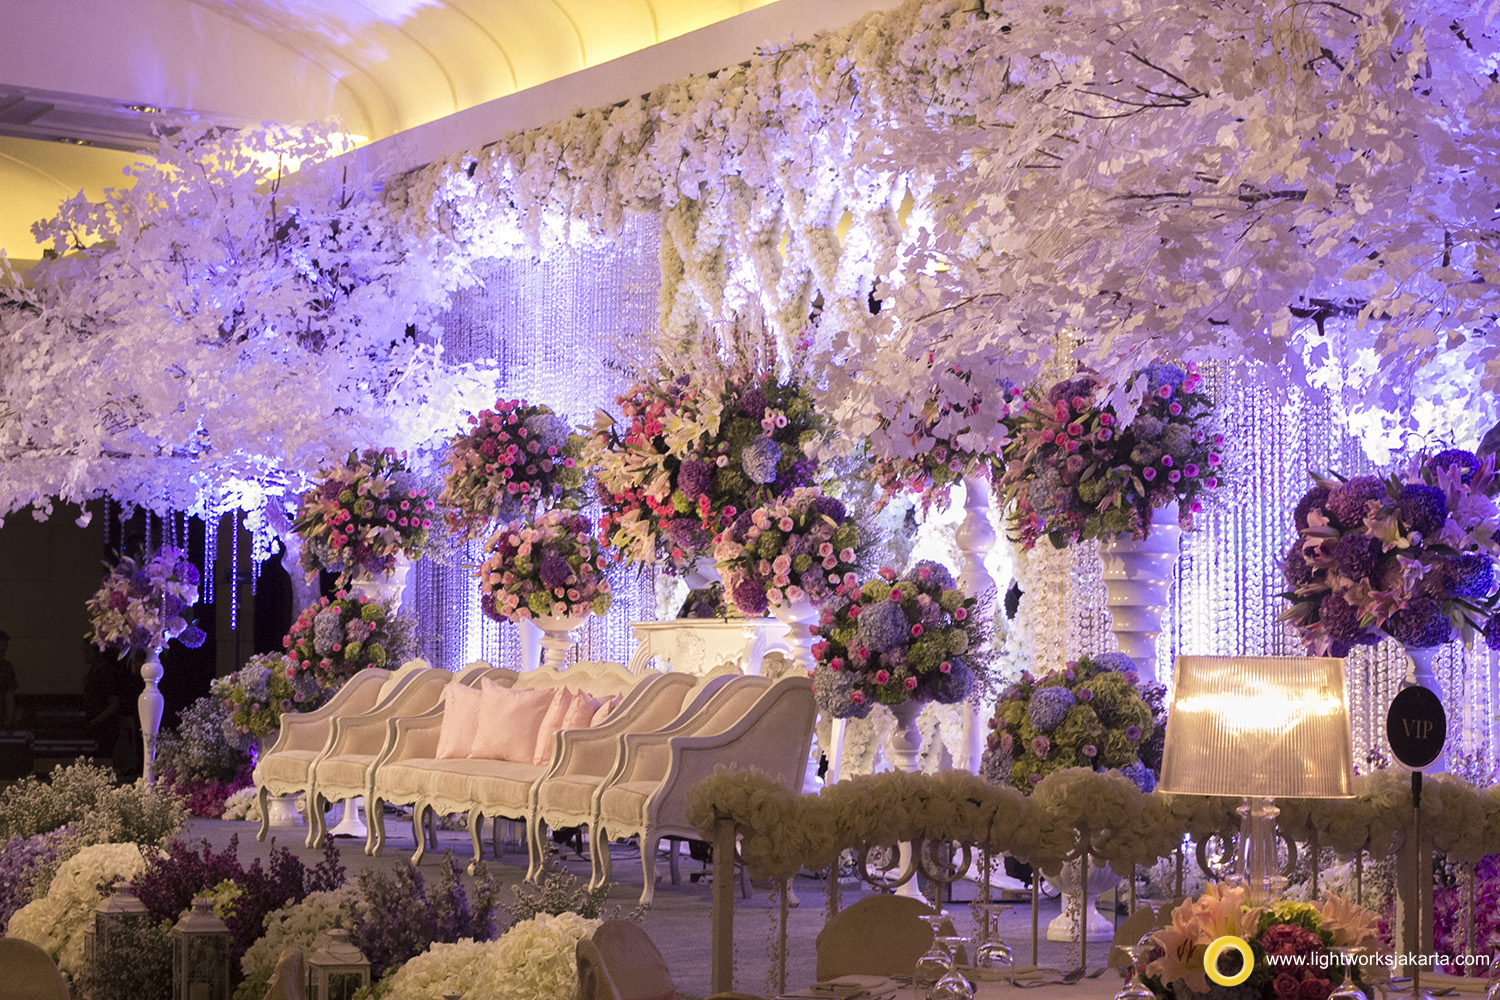 Dharma and Cana's Wedding Reception; Venue at Intercontinental Hotel; Decoration by Lotus Decoration; Wedding Cake by Cream and Lace; Lighting by Lightworks